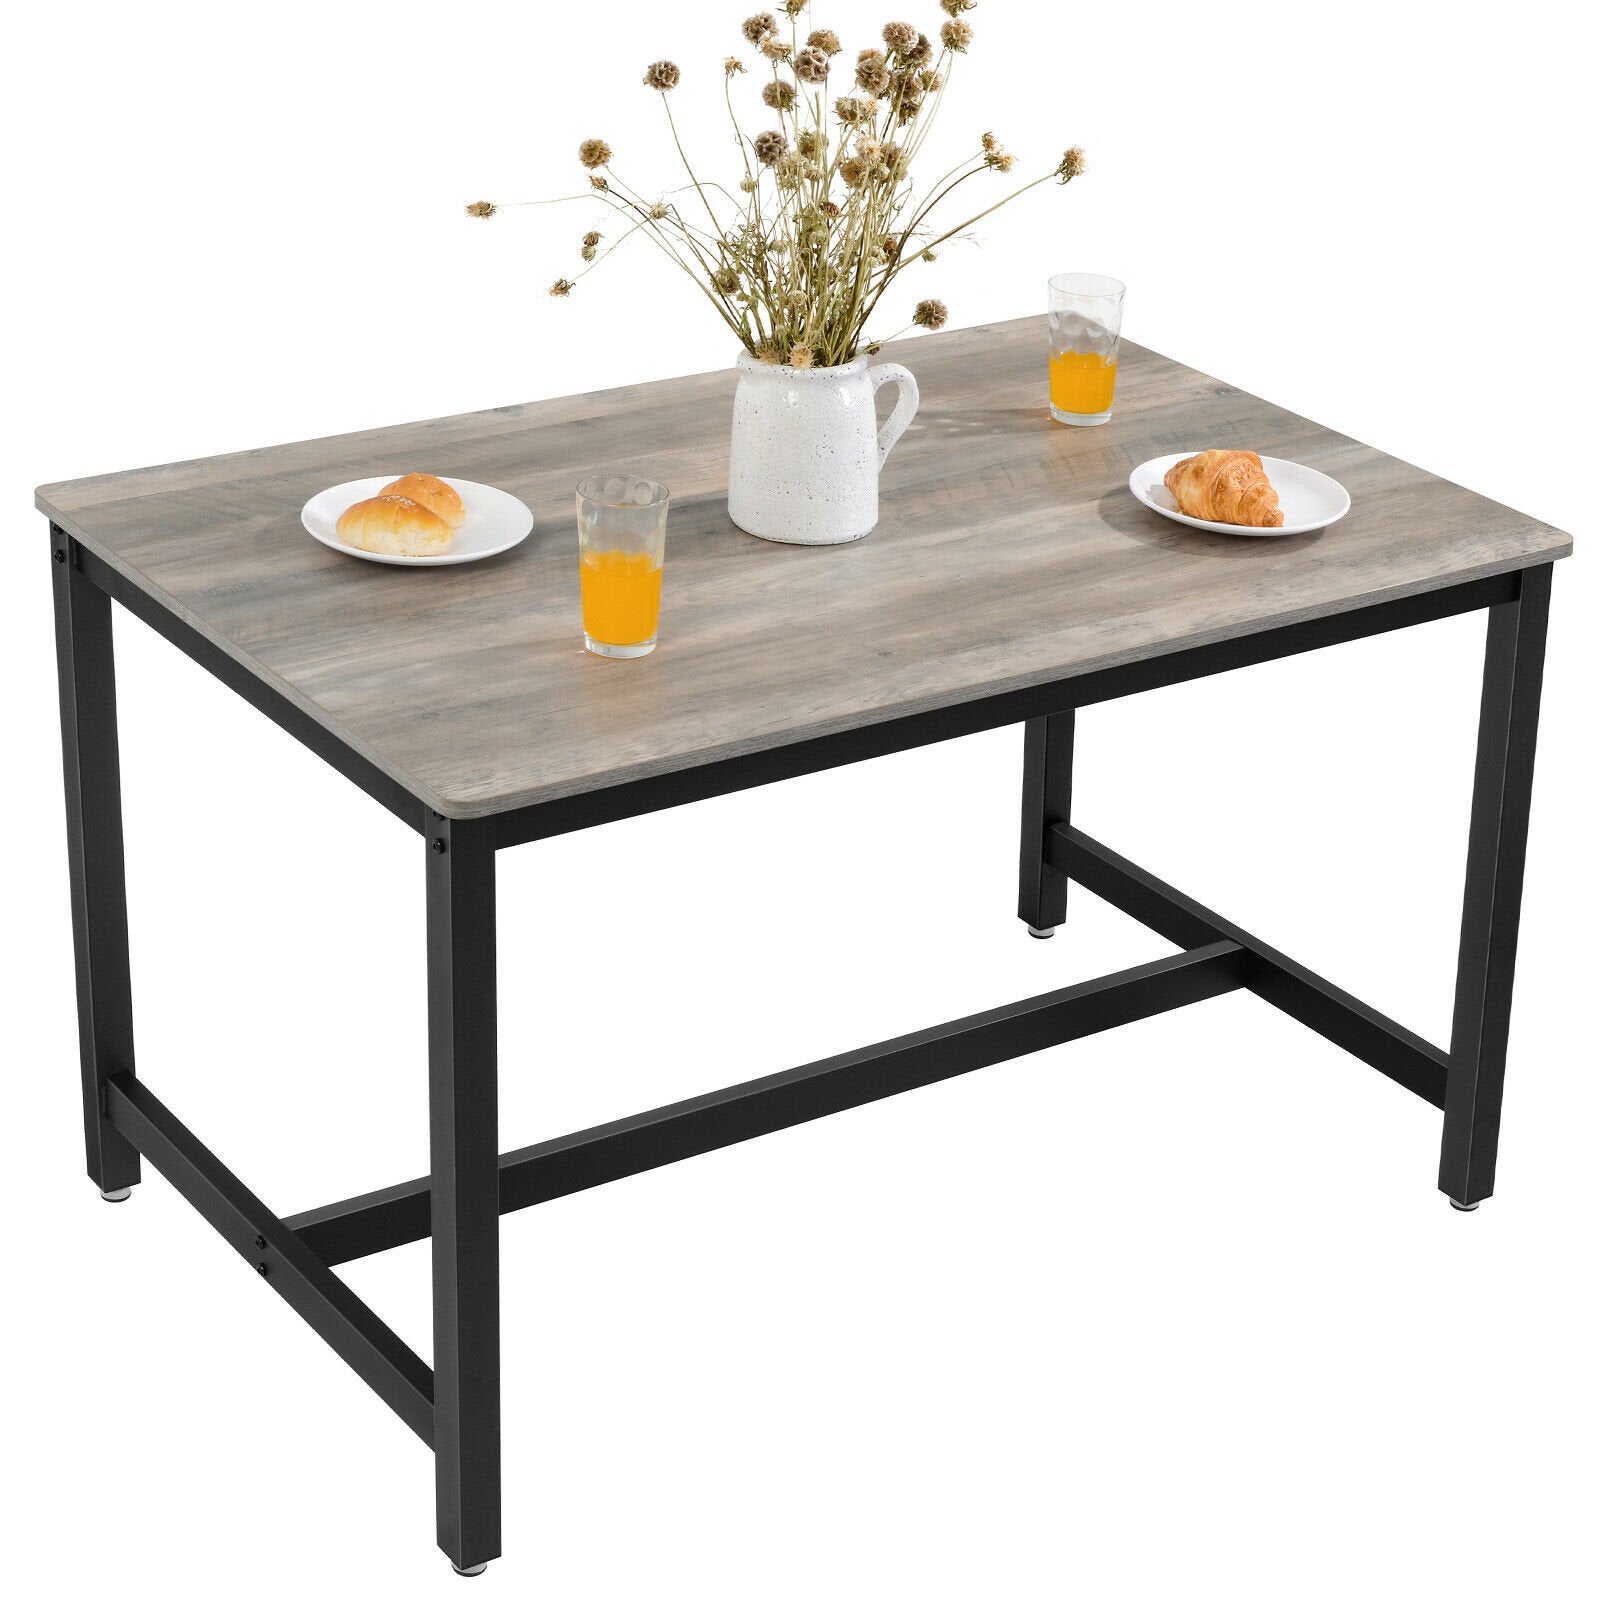 Small Dining Table Rustic Wood 4 Seater